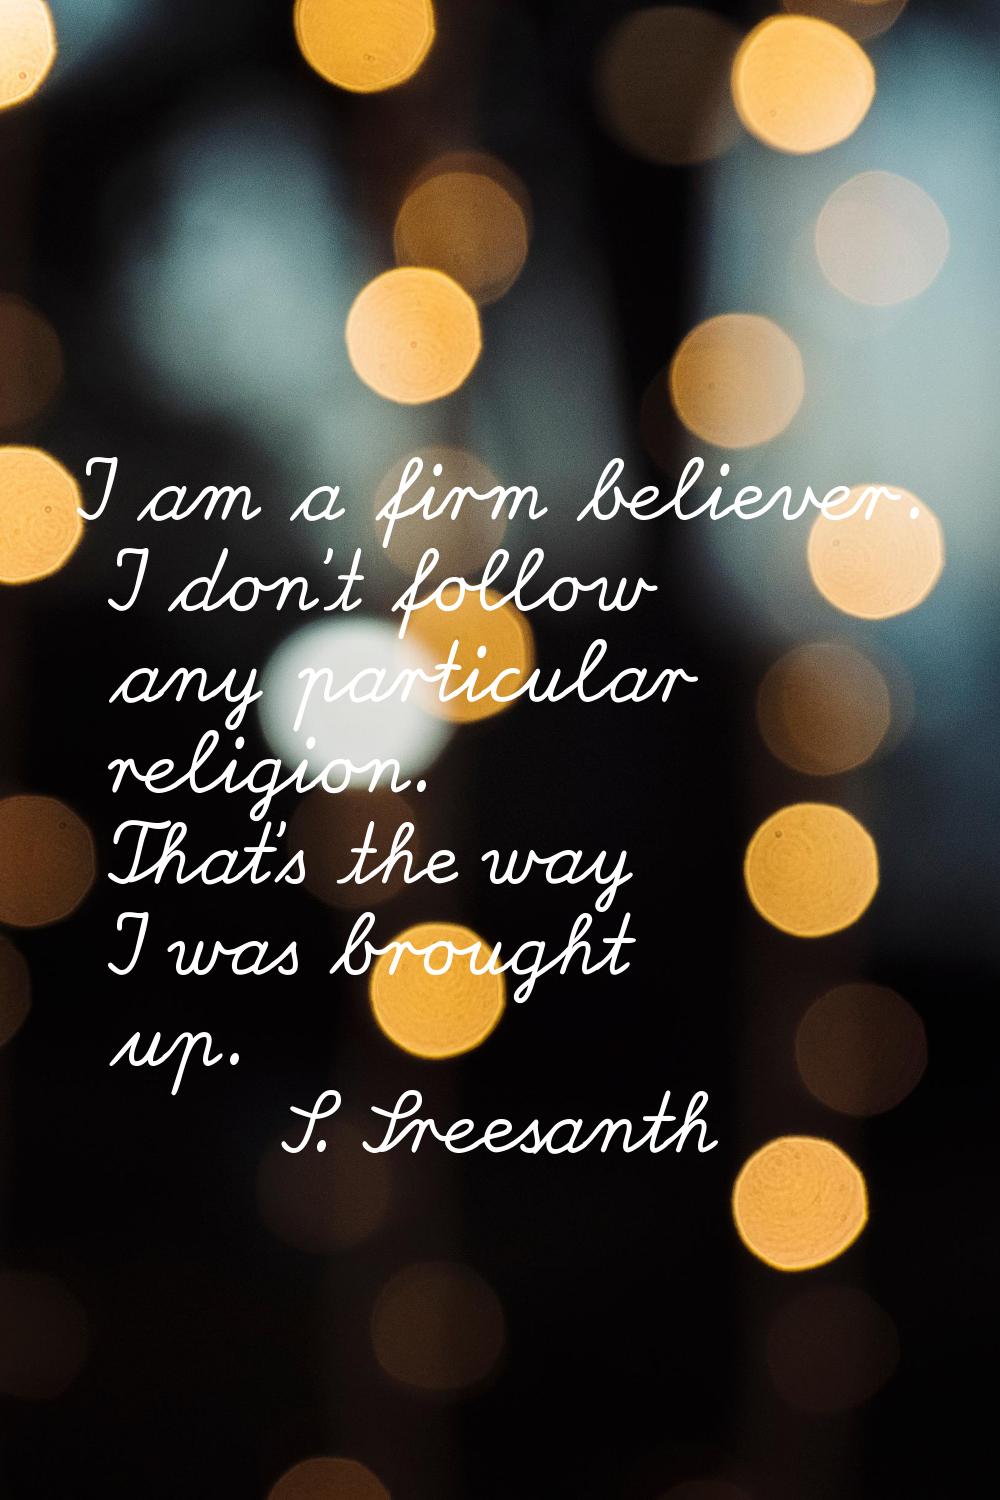 I am a firm believer. I don't follow any particular religion. That's the way I was brought up.